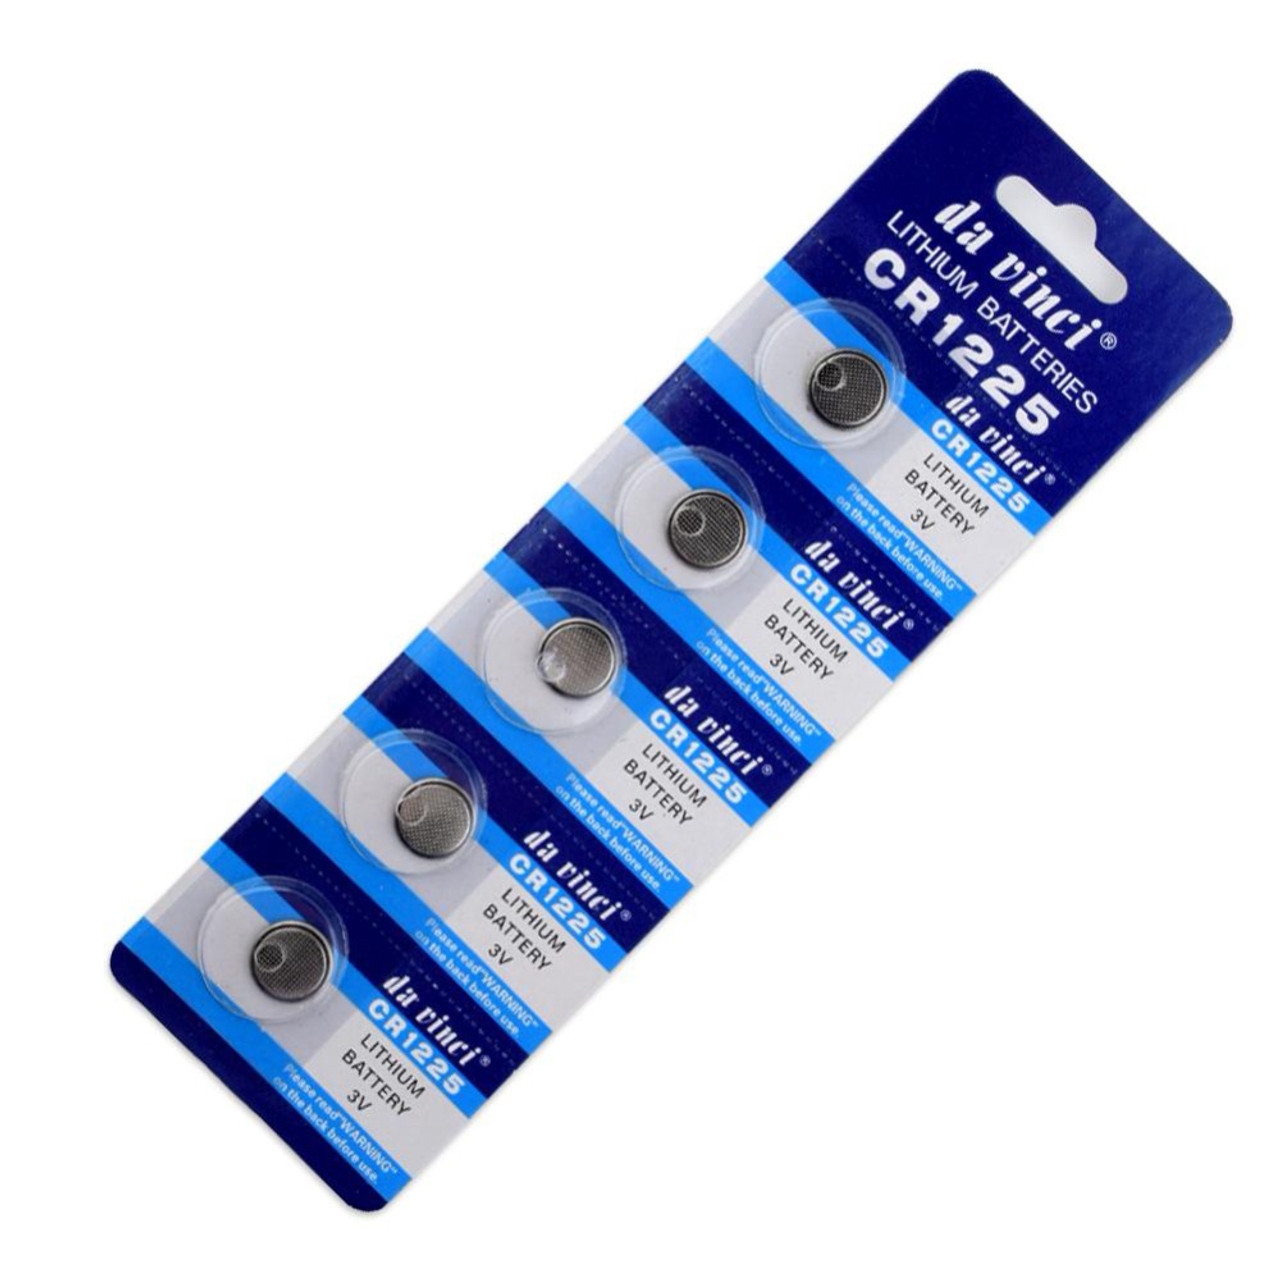 Lithium CR1225 3V Battery for Key Fobs, Calculators, and More (20-Pack) product image